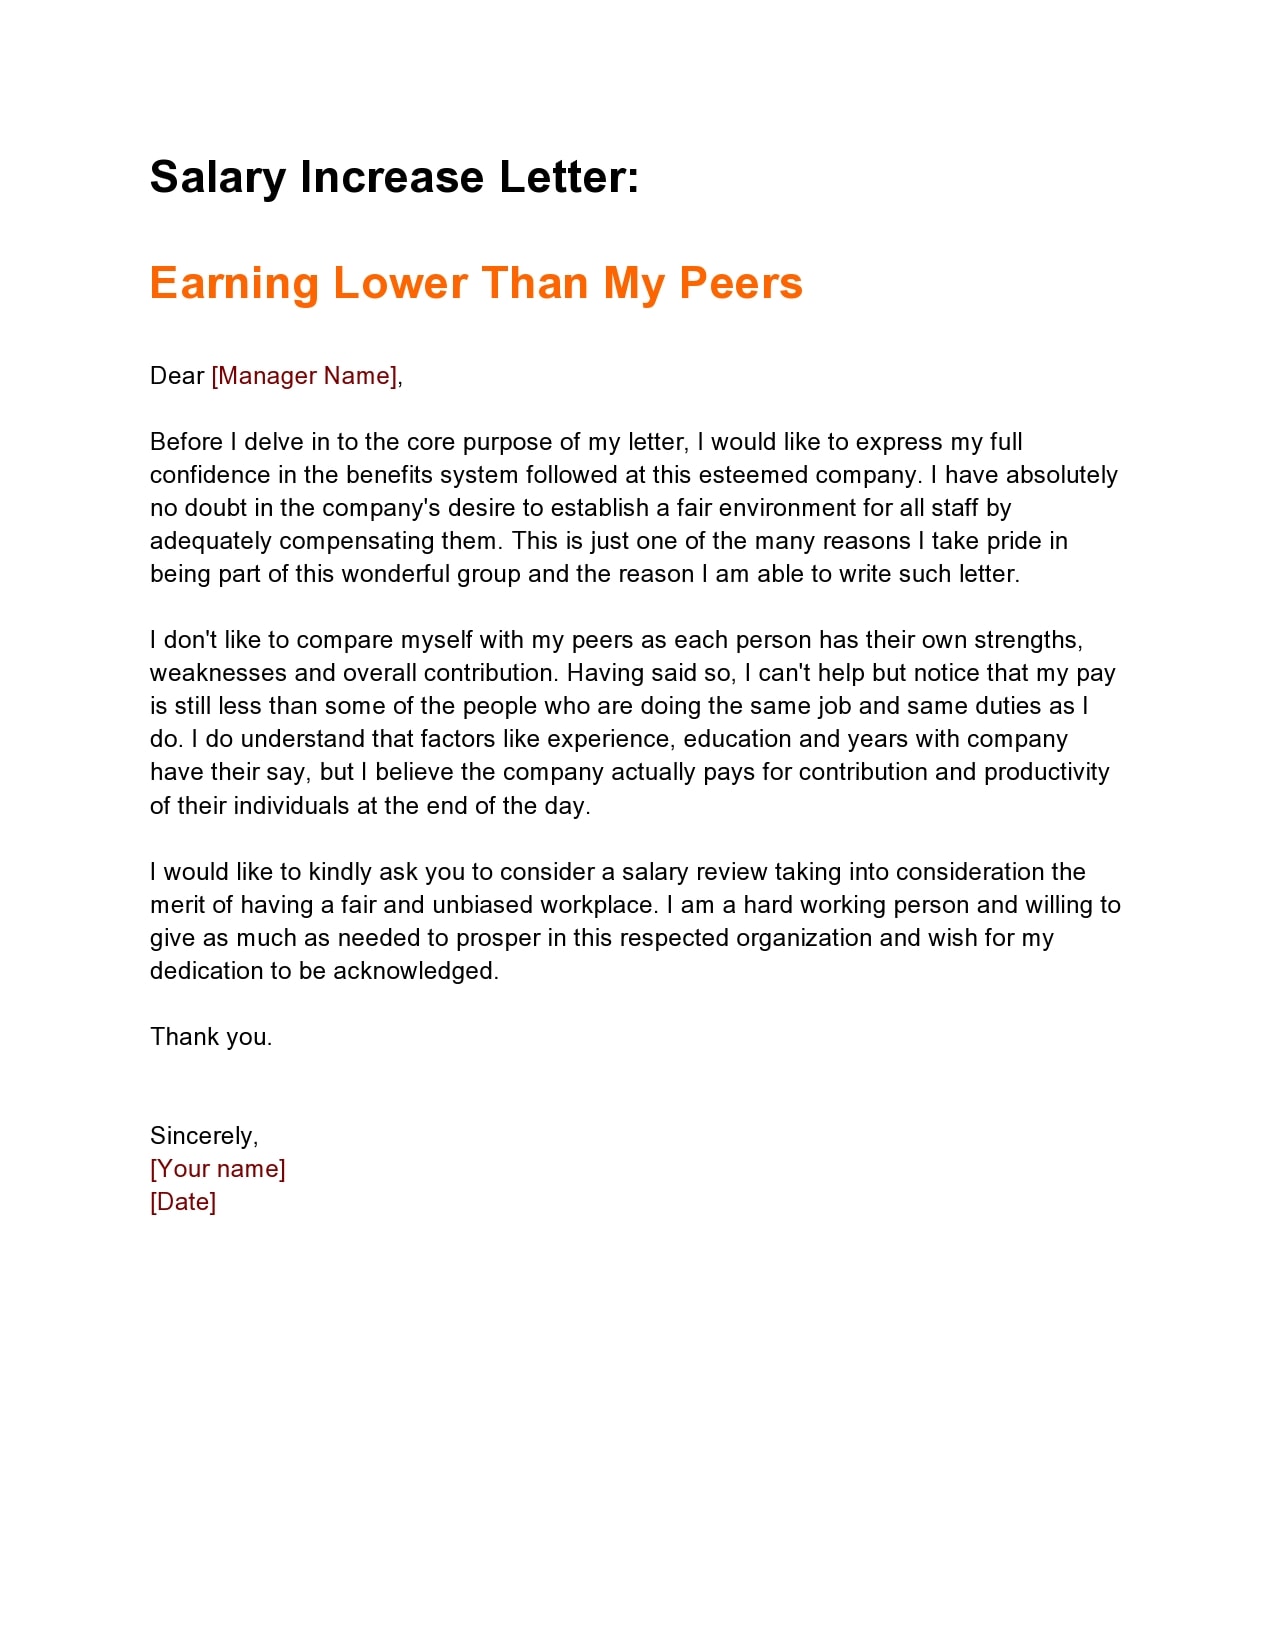 21 Effective Salary Increase Letters & Samples - TemplateArchive With Regard To Salary Increase Letter To Employer Template